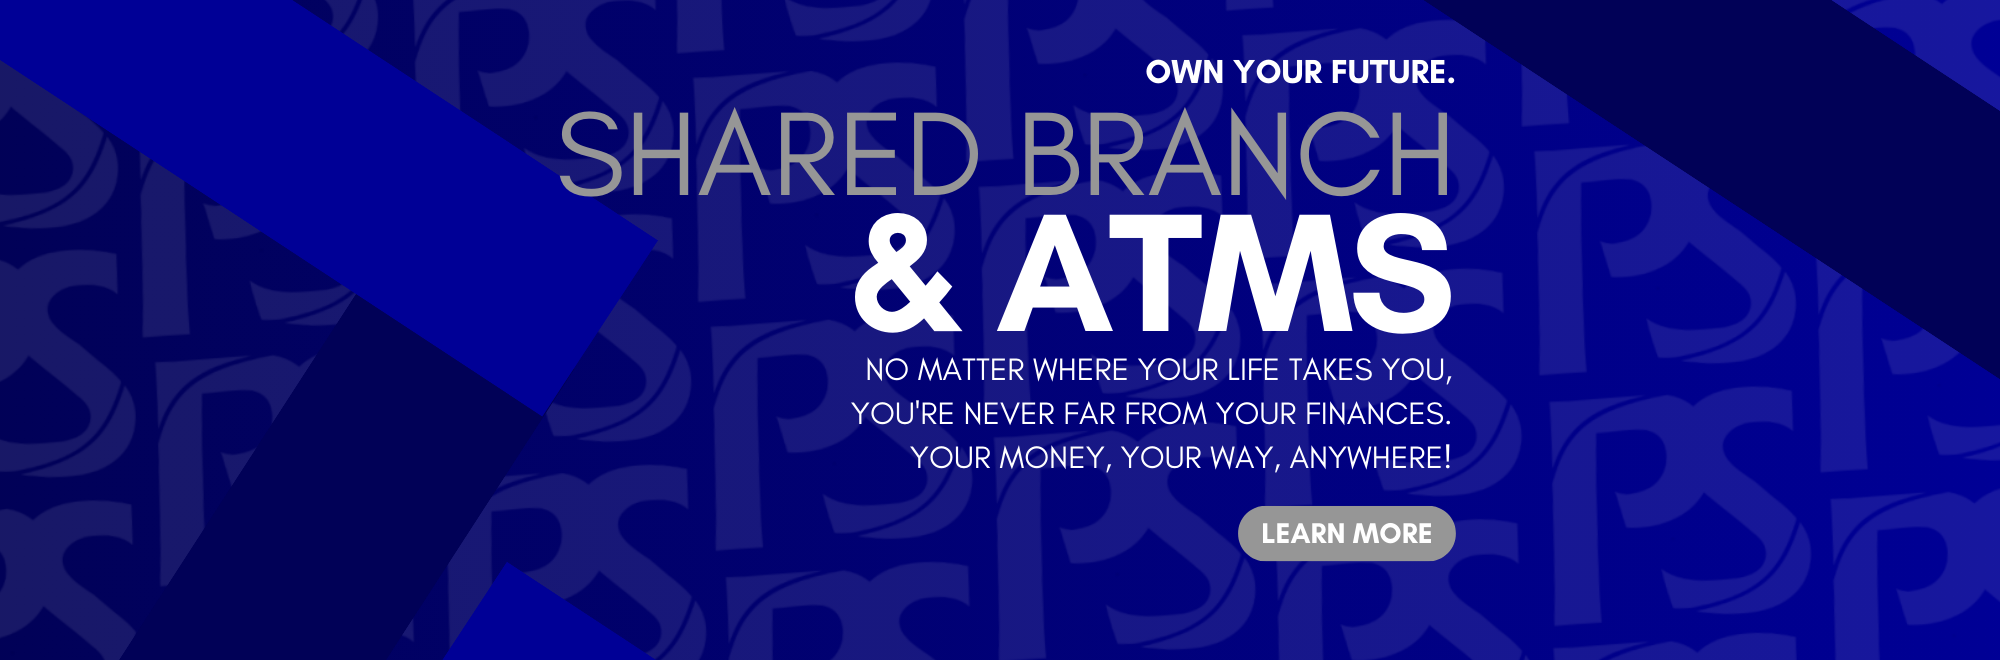 Own your future. Shared Branch & ATMs. No matter where YOUR life takes you, you're never far from your finances. Your money, your way, anywhere! Click to learn more